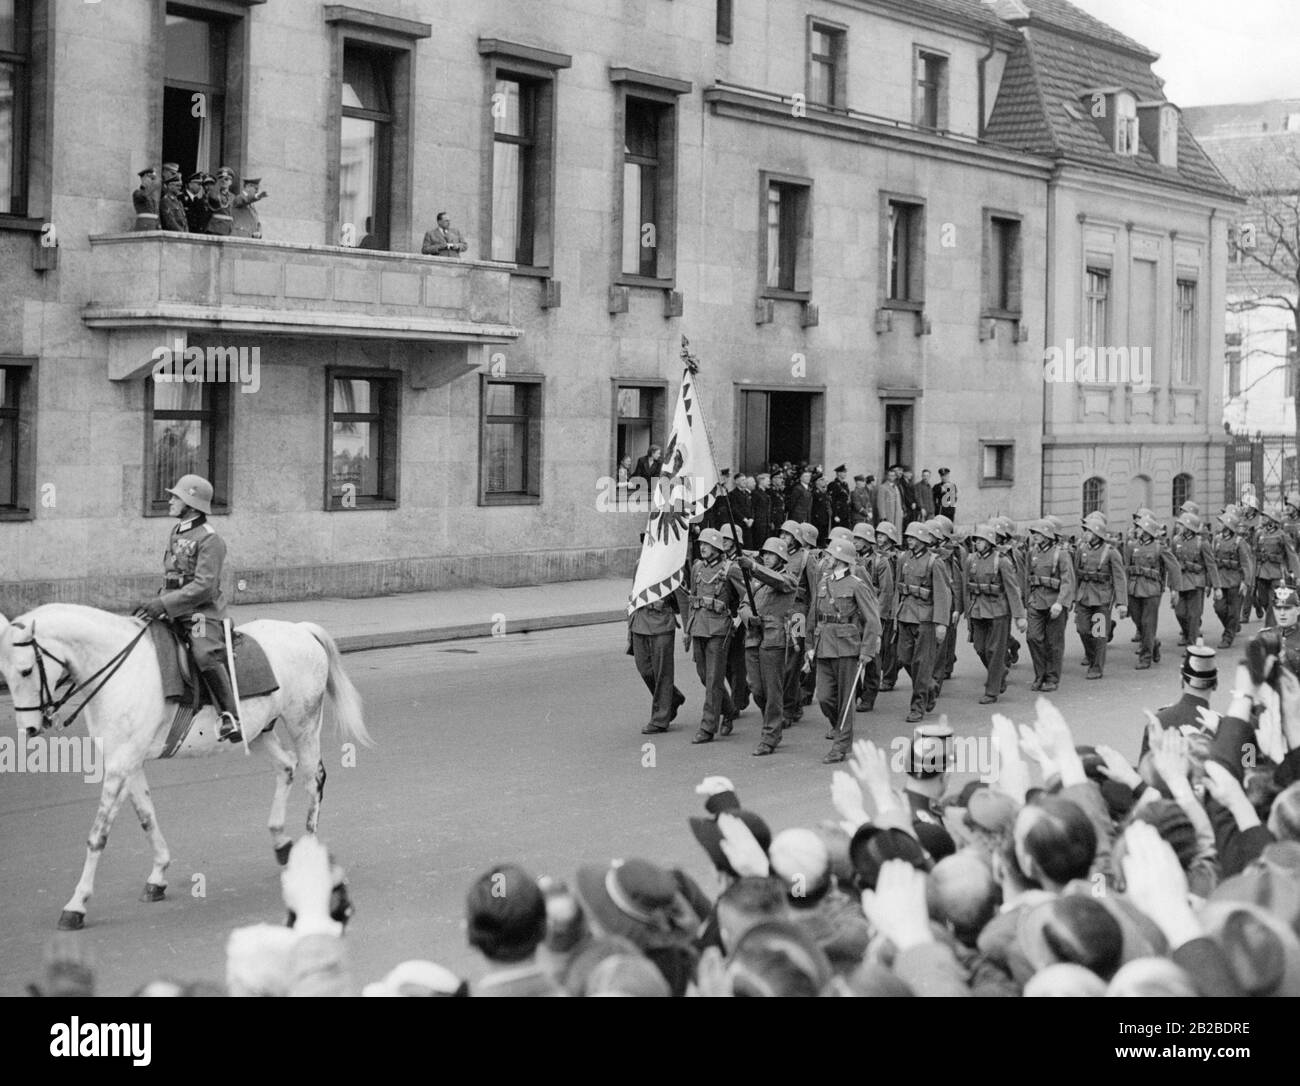 The Austrian battalion marches past the New Reich Chancellery. Adolf Hitler stands on the balcony and makes the Nazi salute. The foremost soldier carries the flag of the Imperial Royal Trabant Guards. They are greeted by passers-by on the roadside with the Nazi salute. SS men stand at a side entrance of the Reich Chancellery. Stock Photo